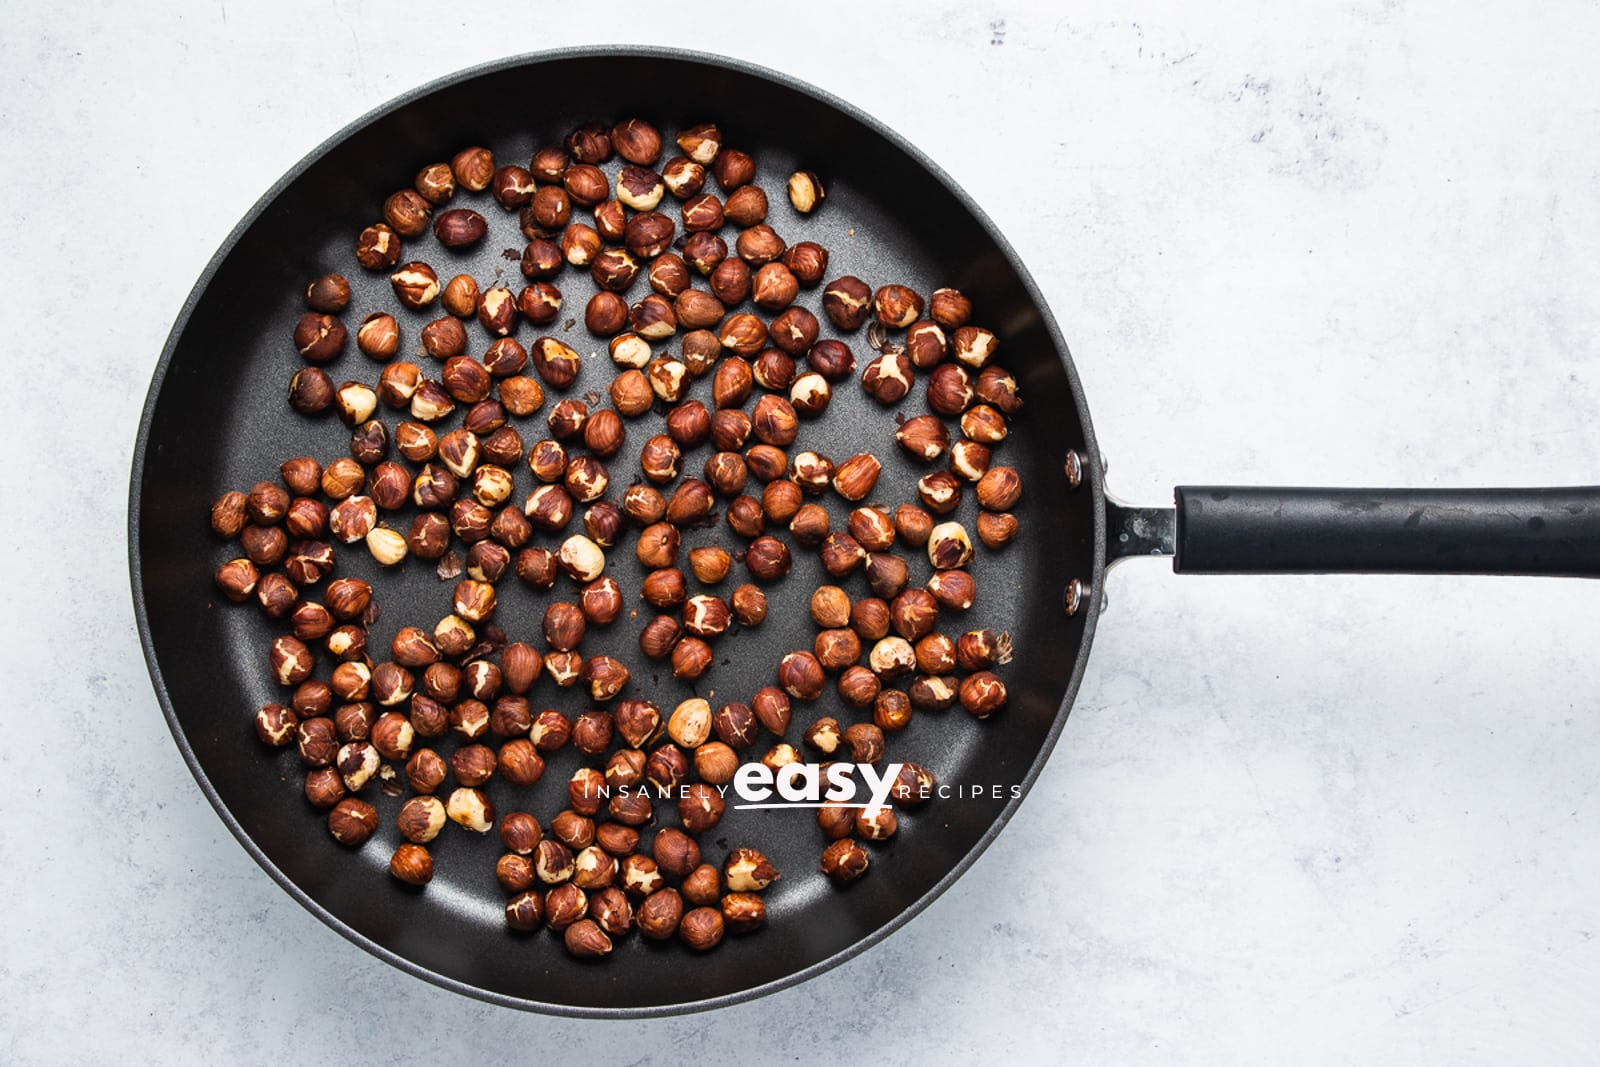 Top view photo of hazelnuts roasting in a saucepan.